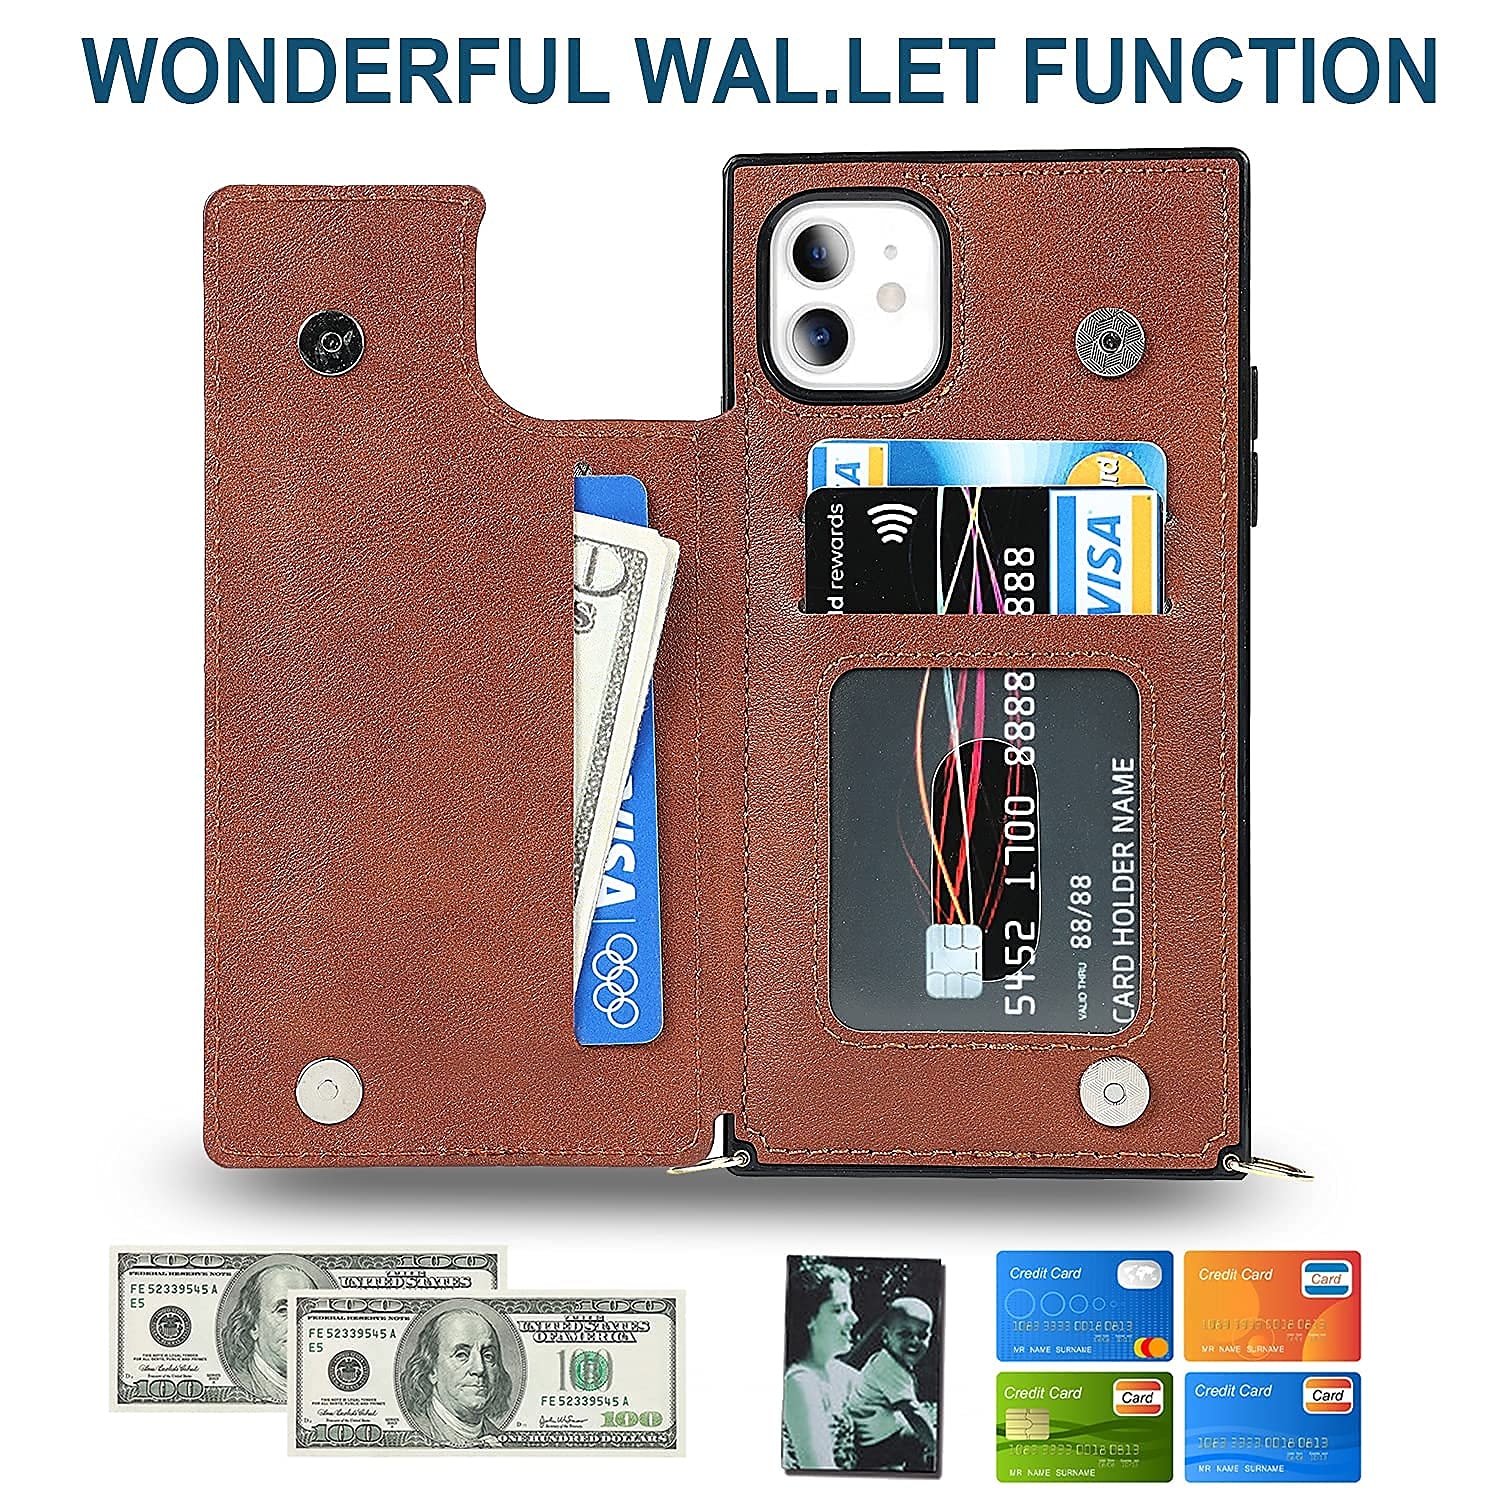 Leather Cards Solt Wallet Case for IPhone 14 Pro Max 13 12 Mini 11